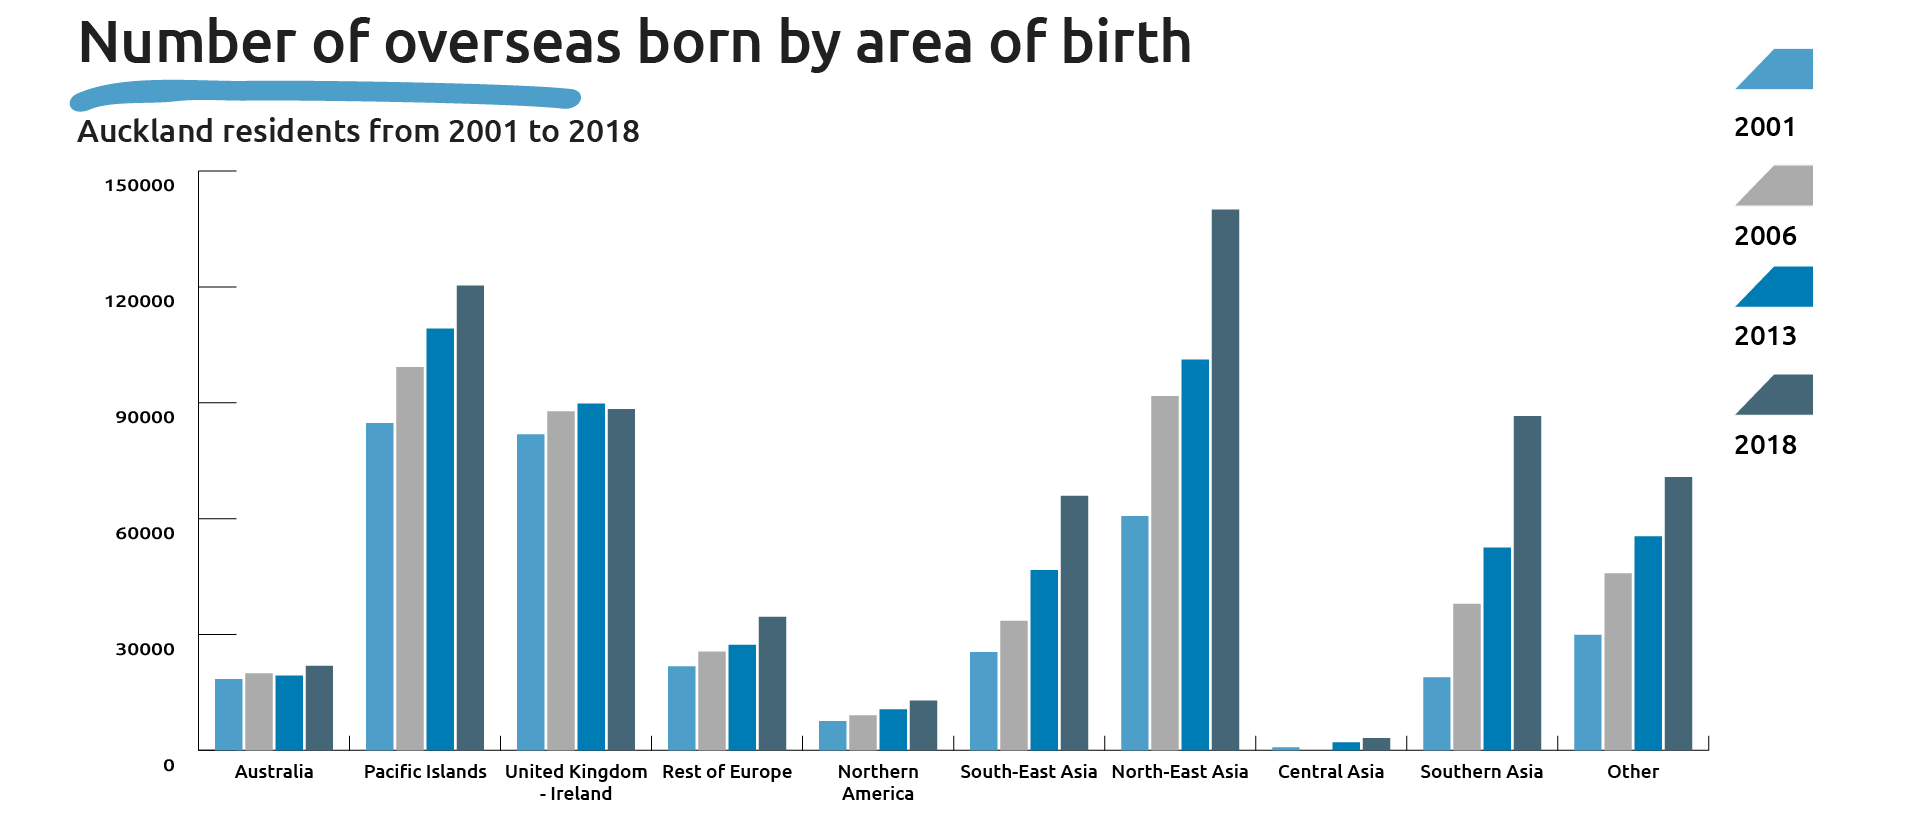 Number of overseas born by area of birth